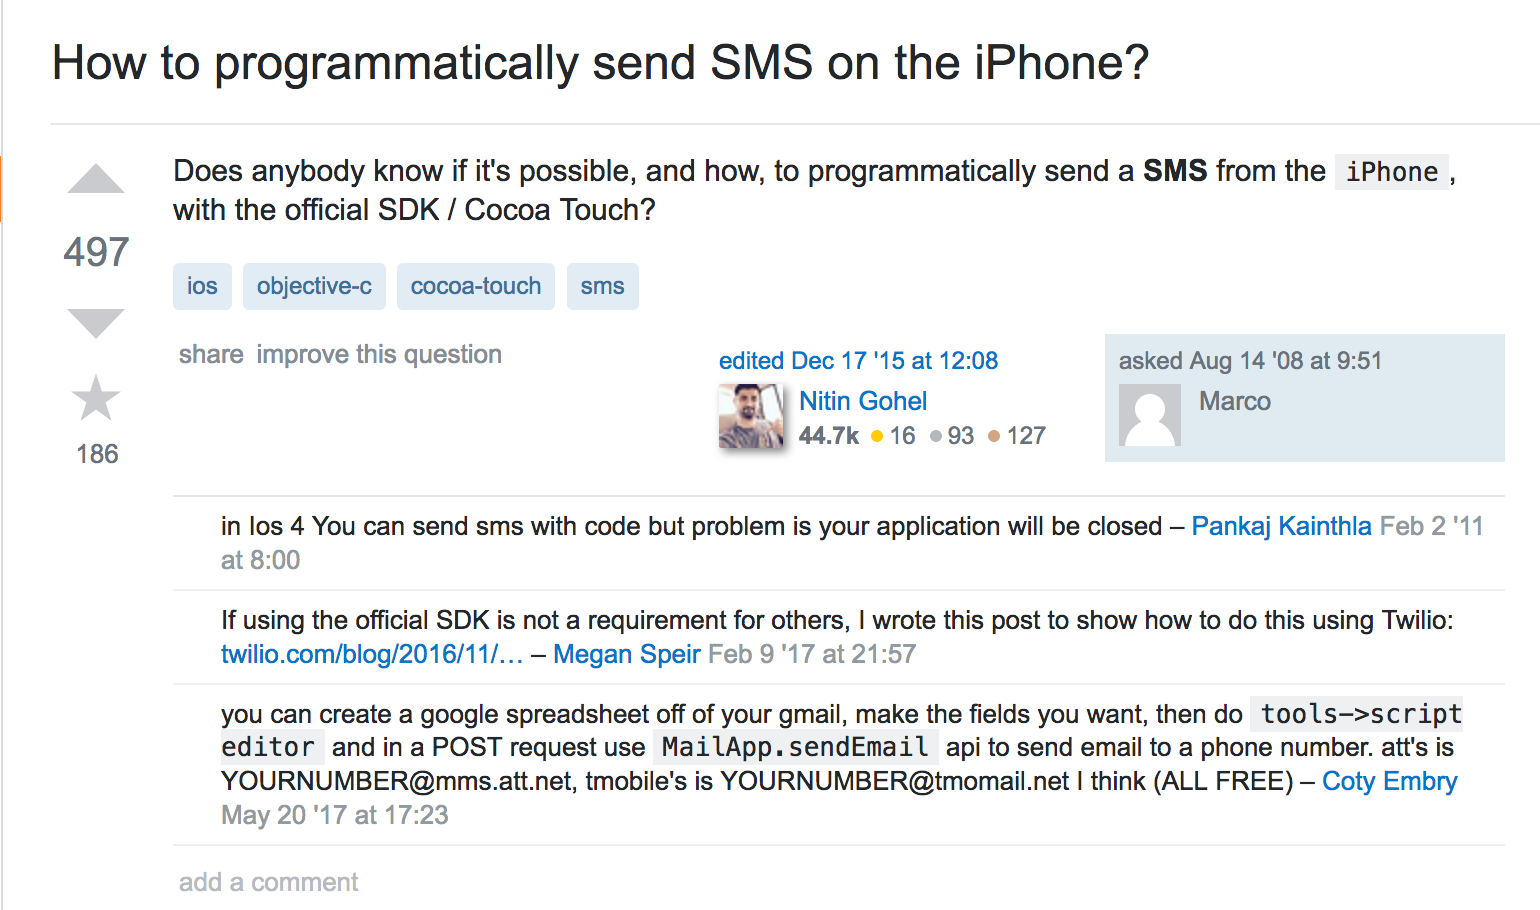 Stack Overflow question on how to send an SMS from an iPhone